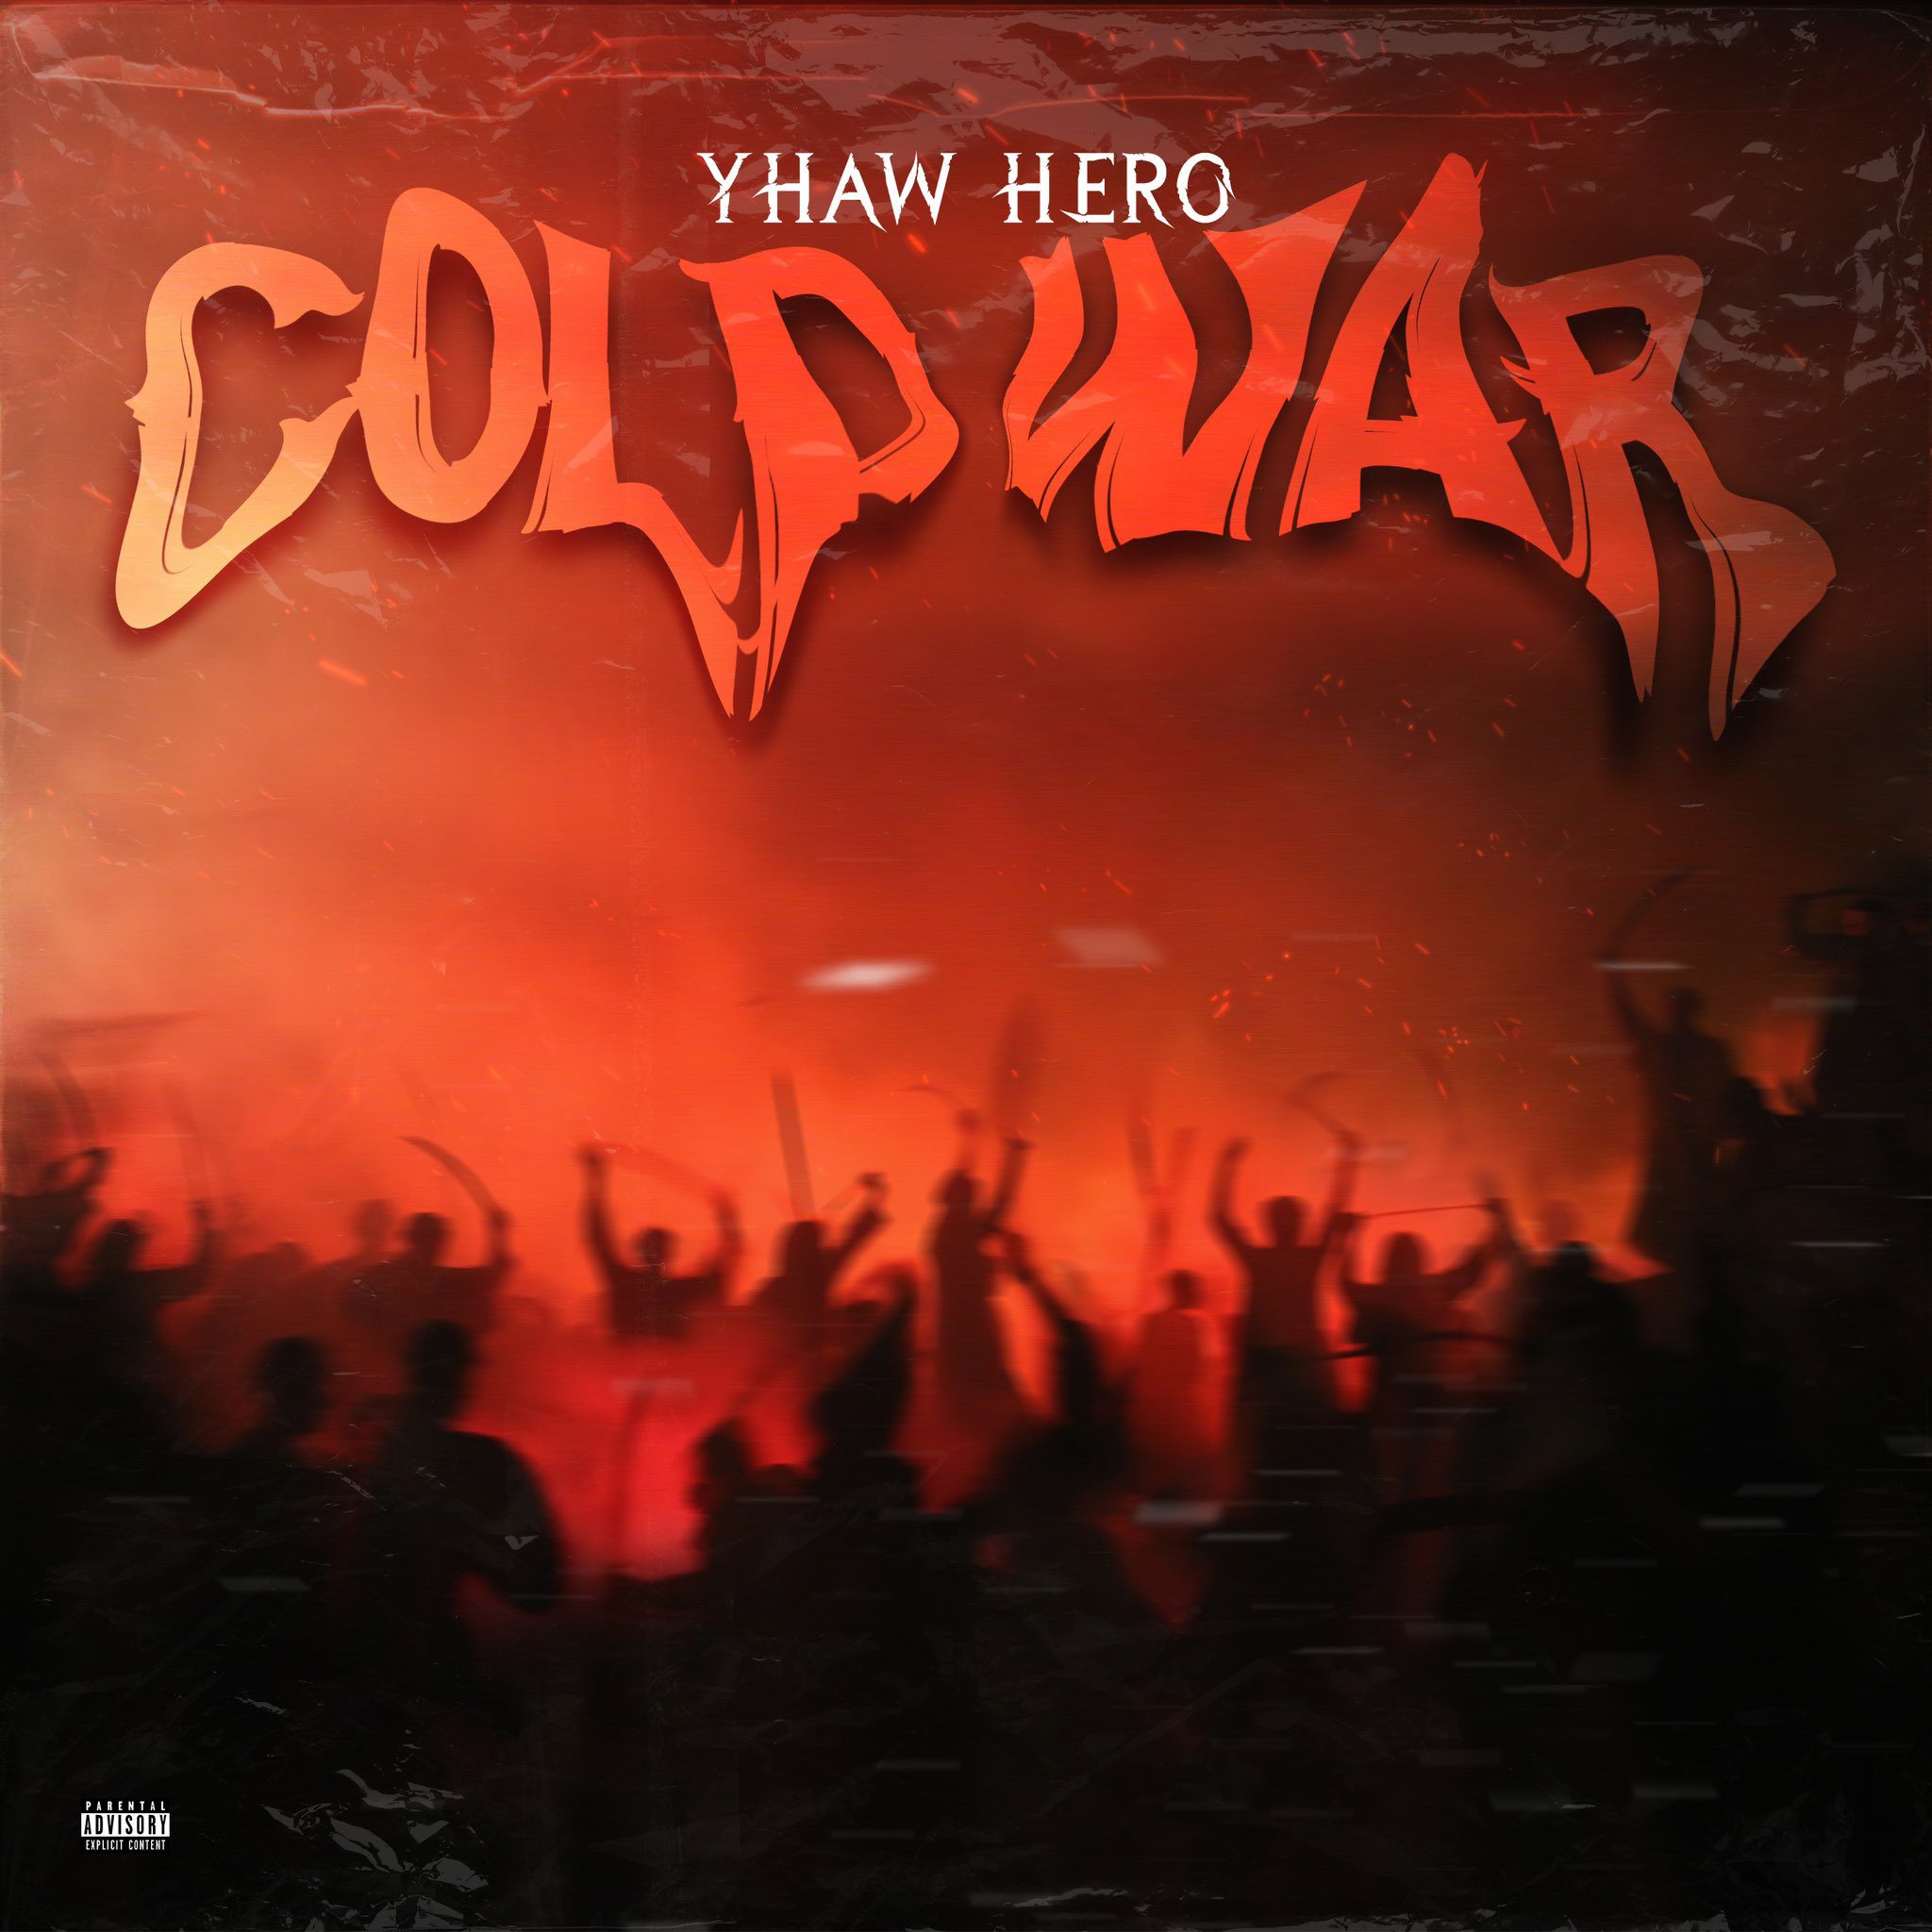 Yhaw Hero Set To Release “Cold War” on Friday